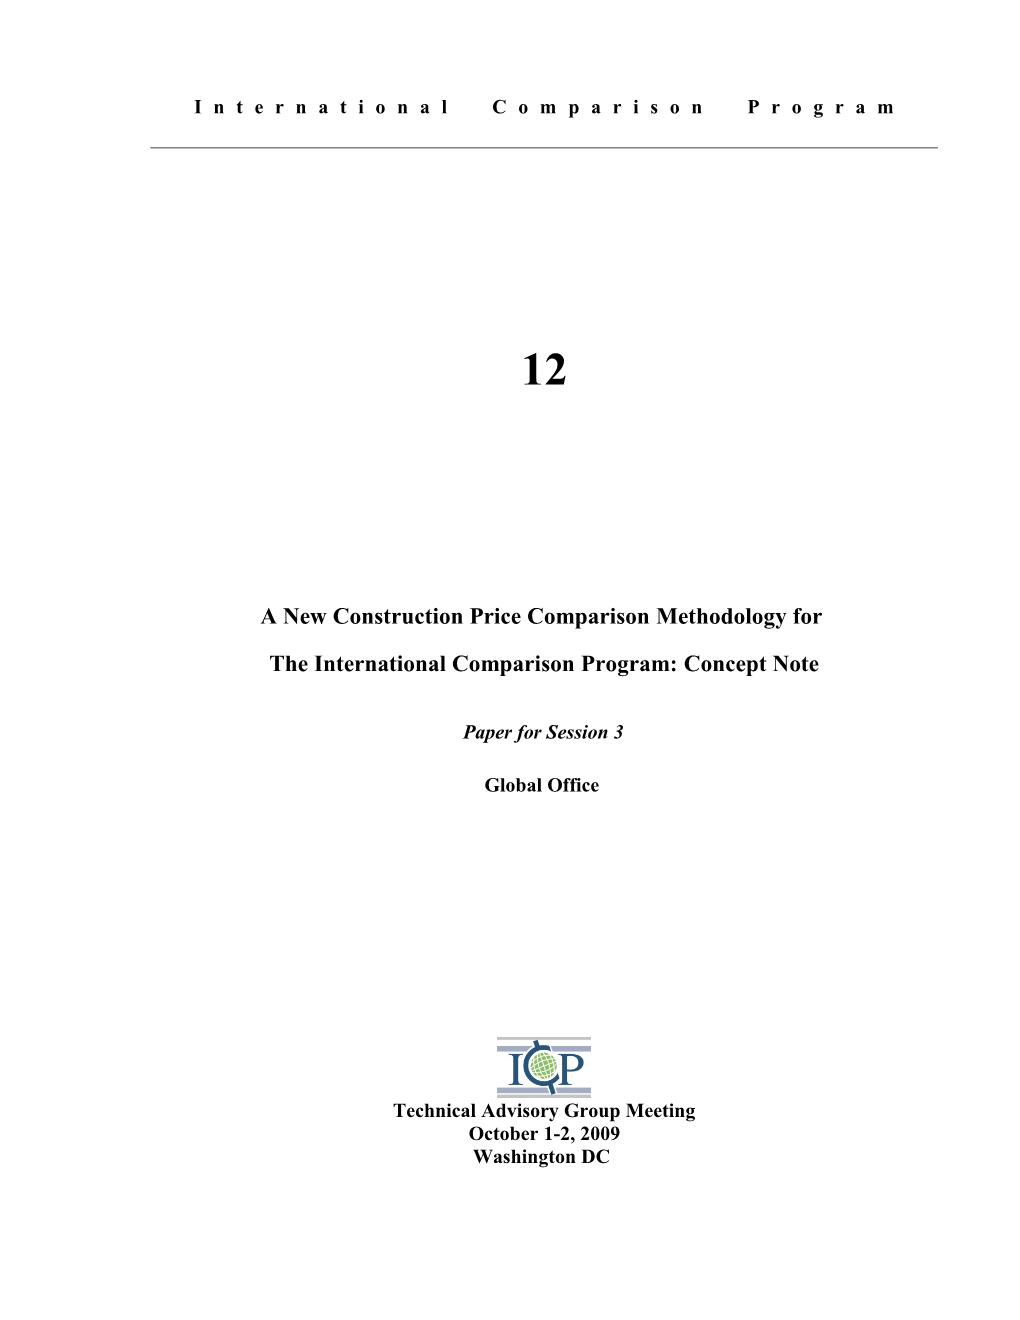 A New Construction Price Comparison Methodology For